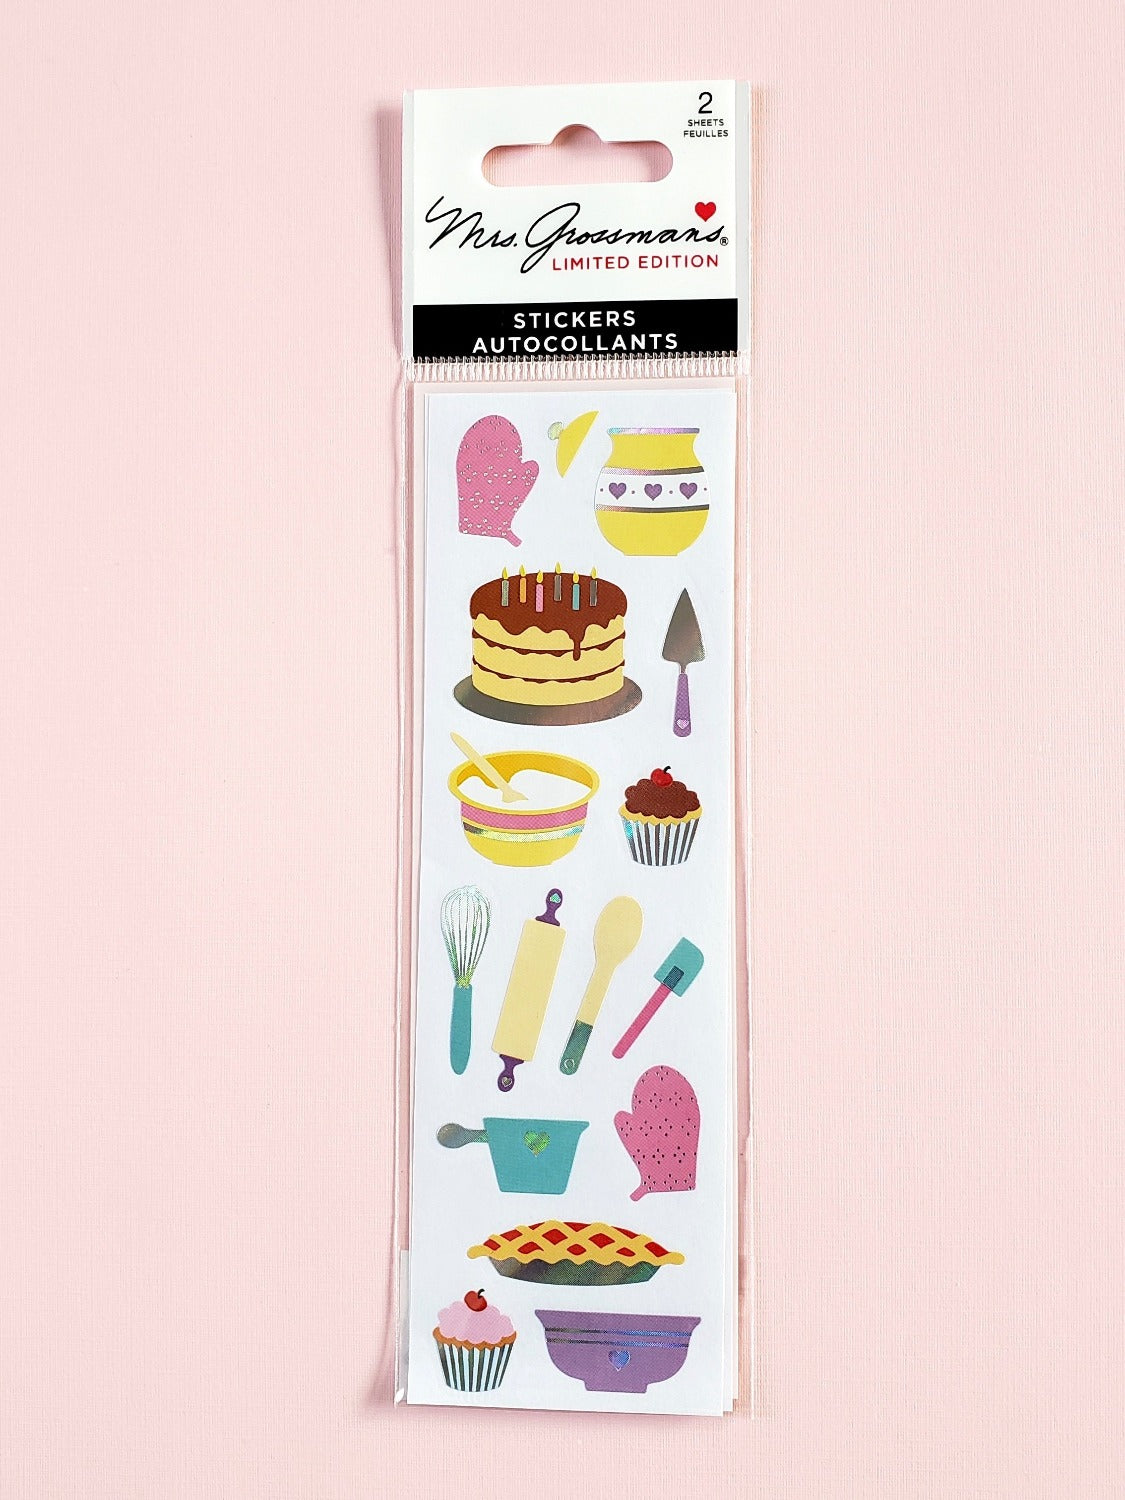 Mrs Grossman's limited edition pastry chef stickers